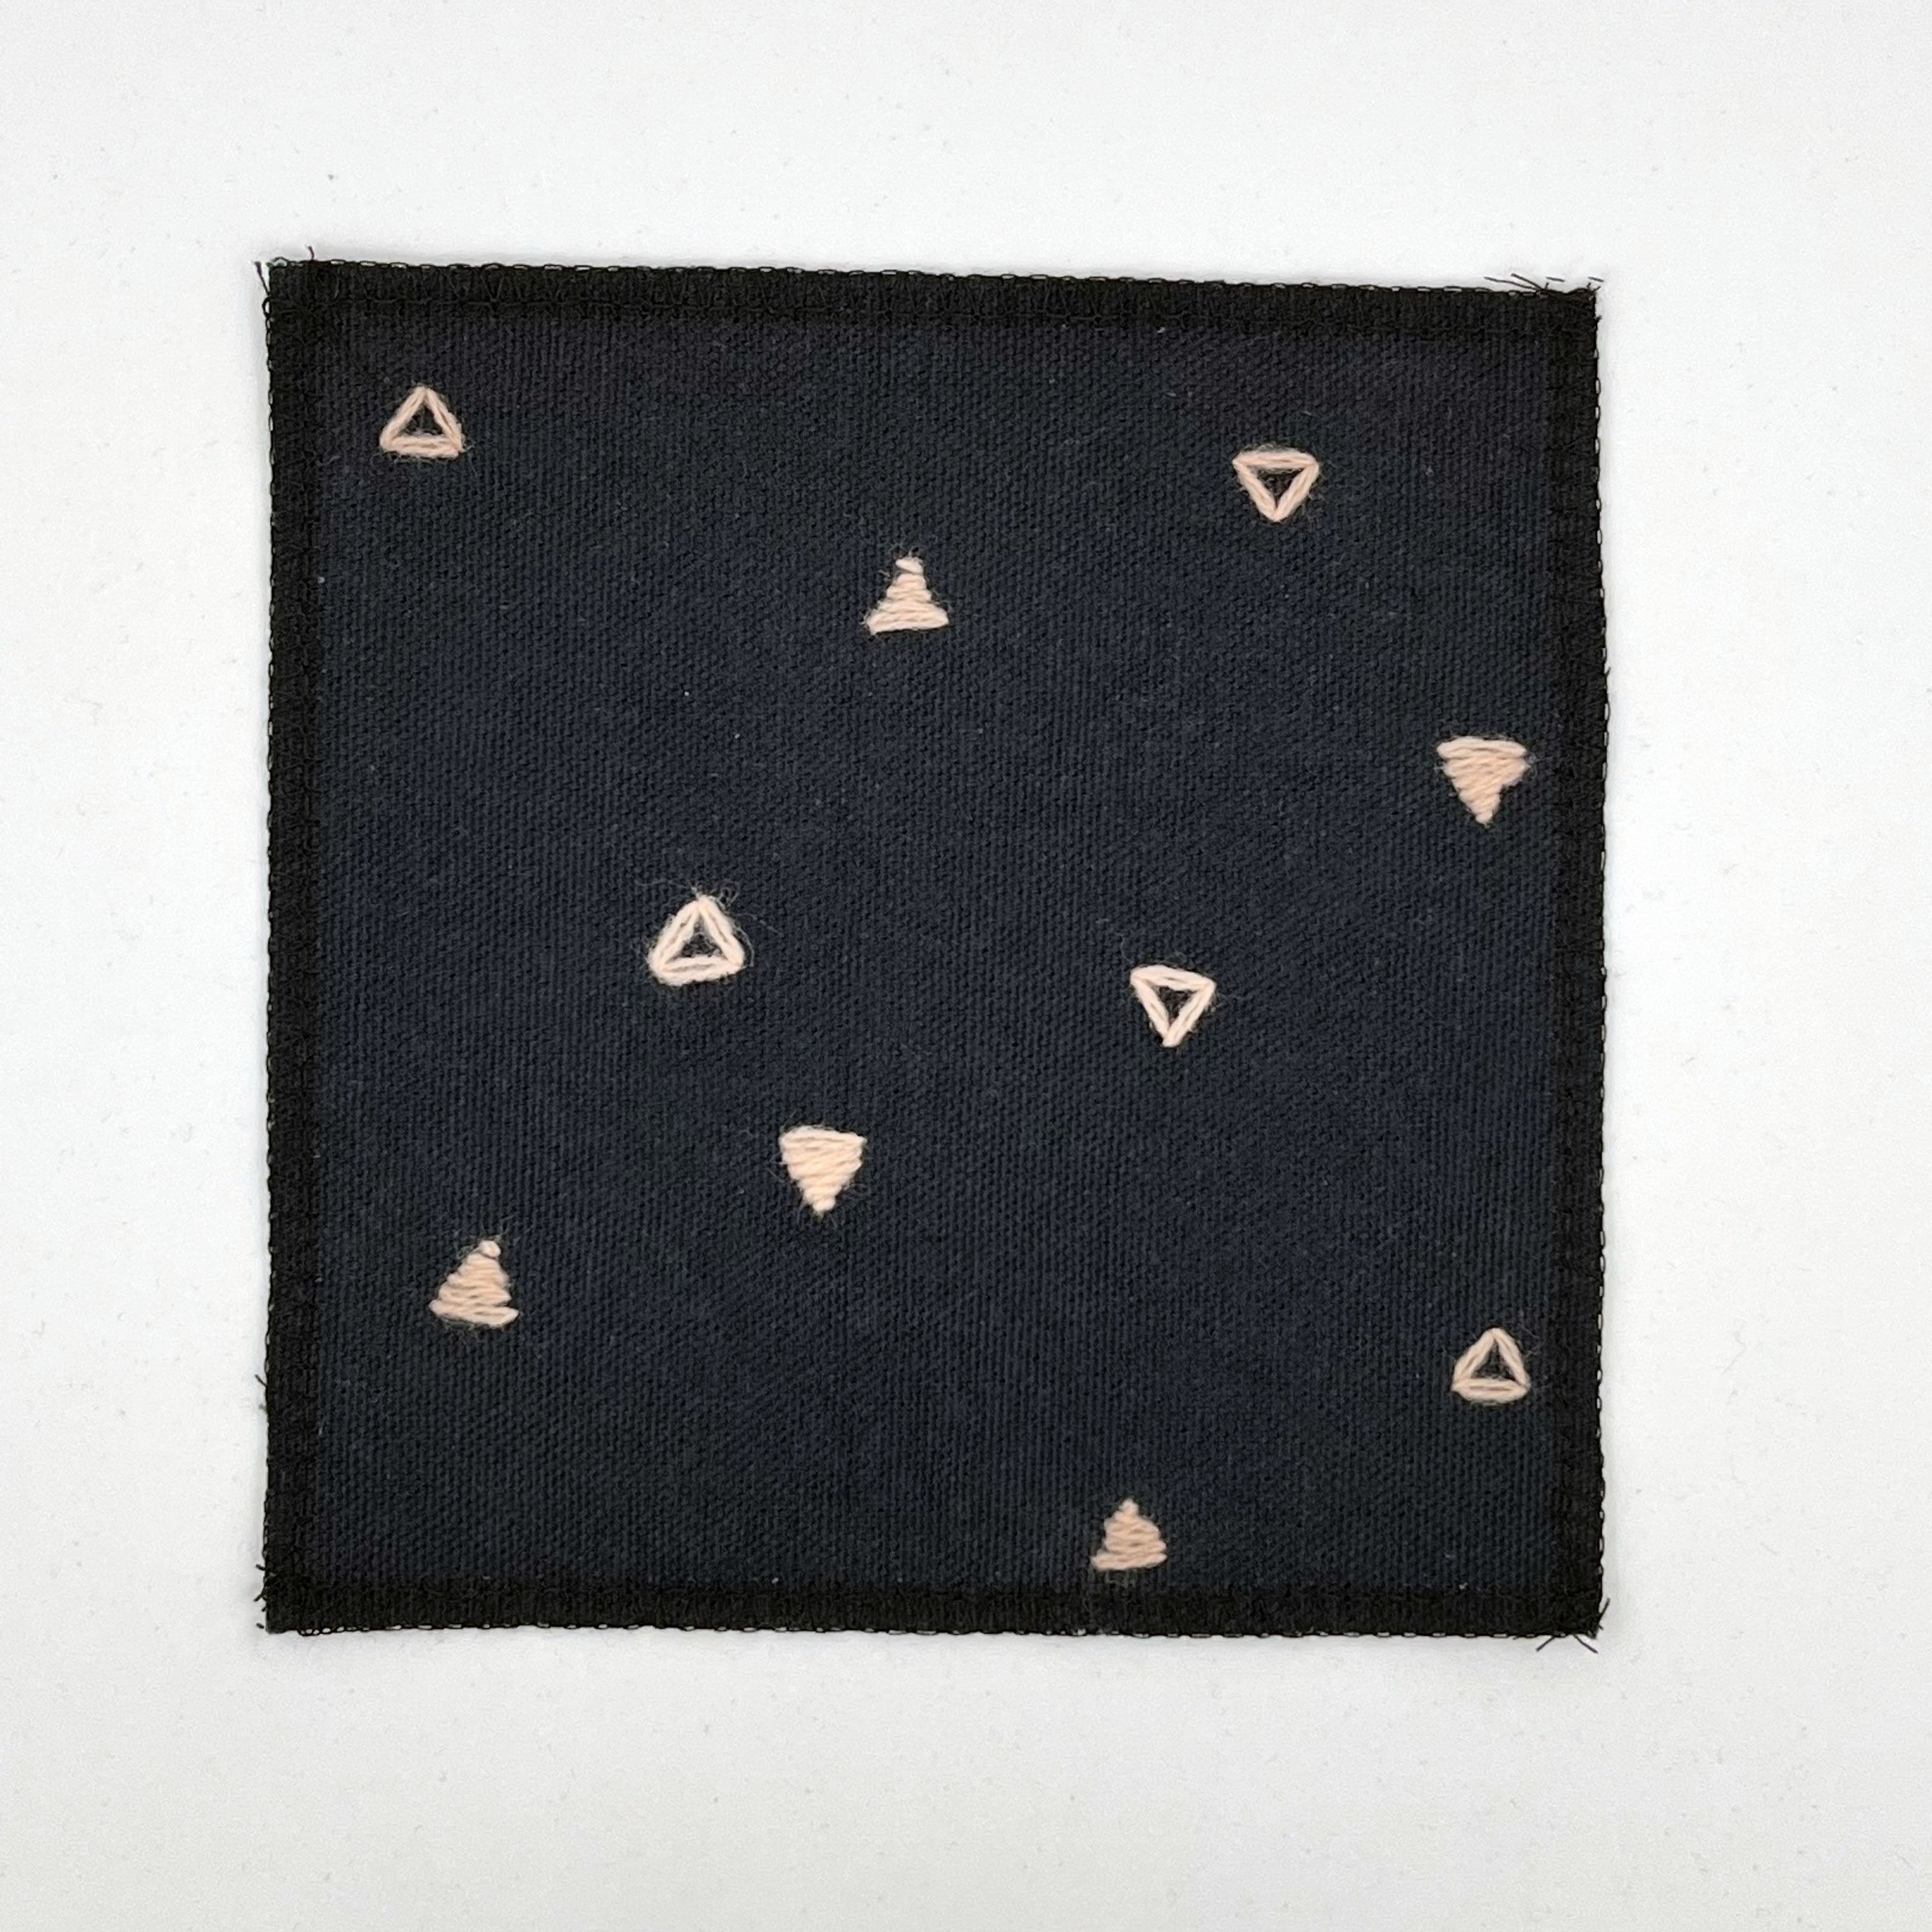 Square Patch with Embroidered Triangles